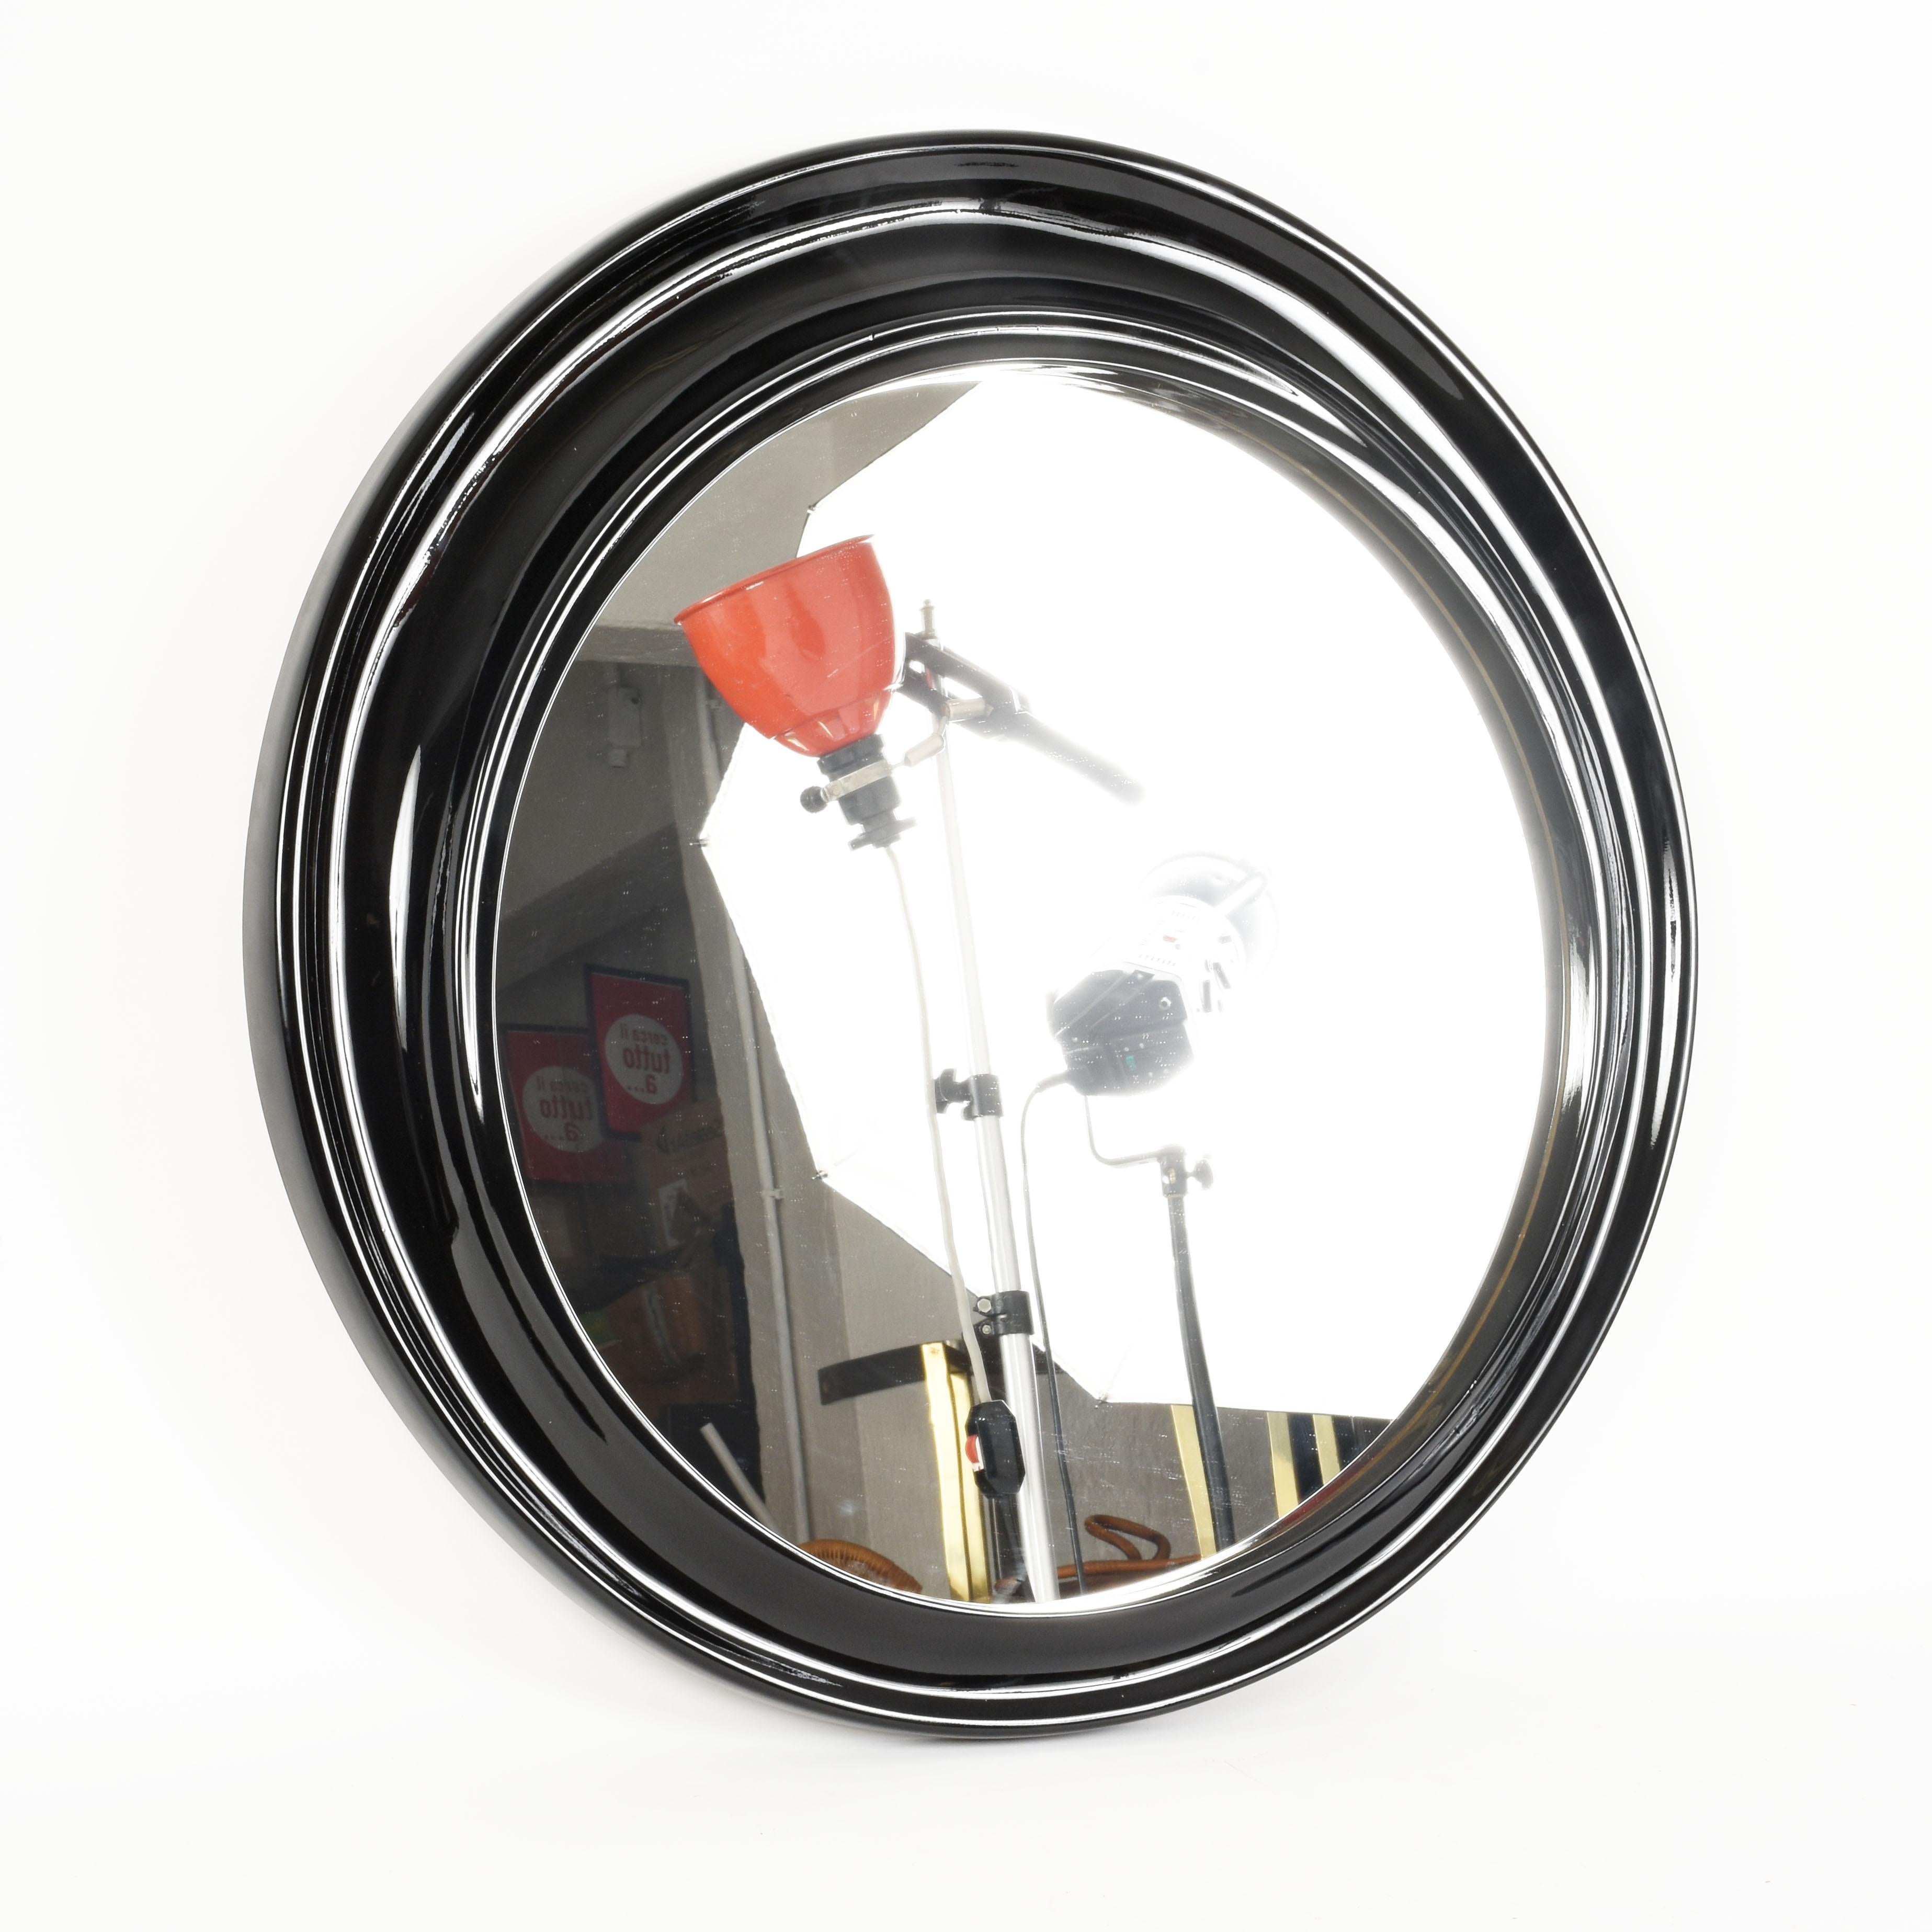 European Midcentury Round Italian Mirror with Black Lacquered Resin Frame, 1970s